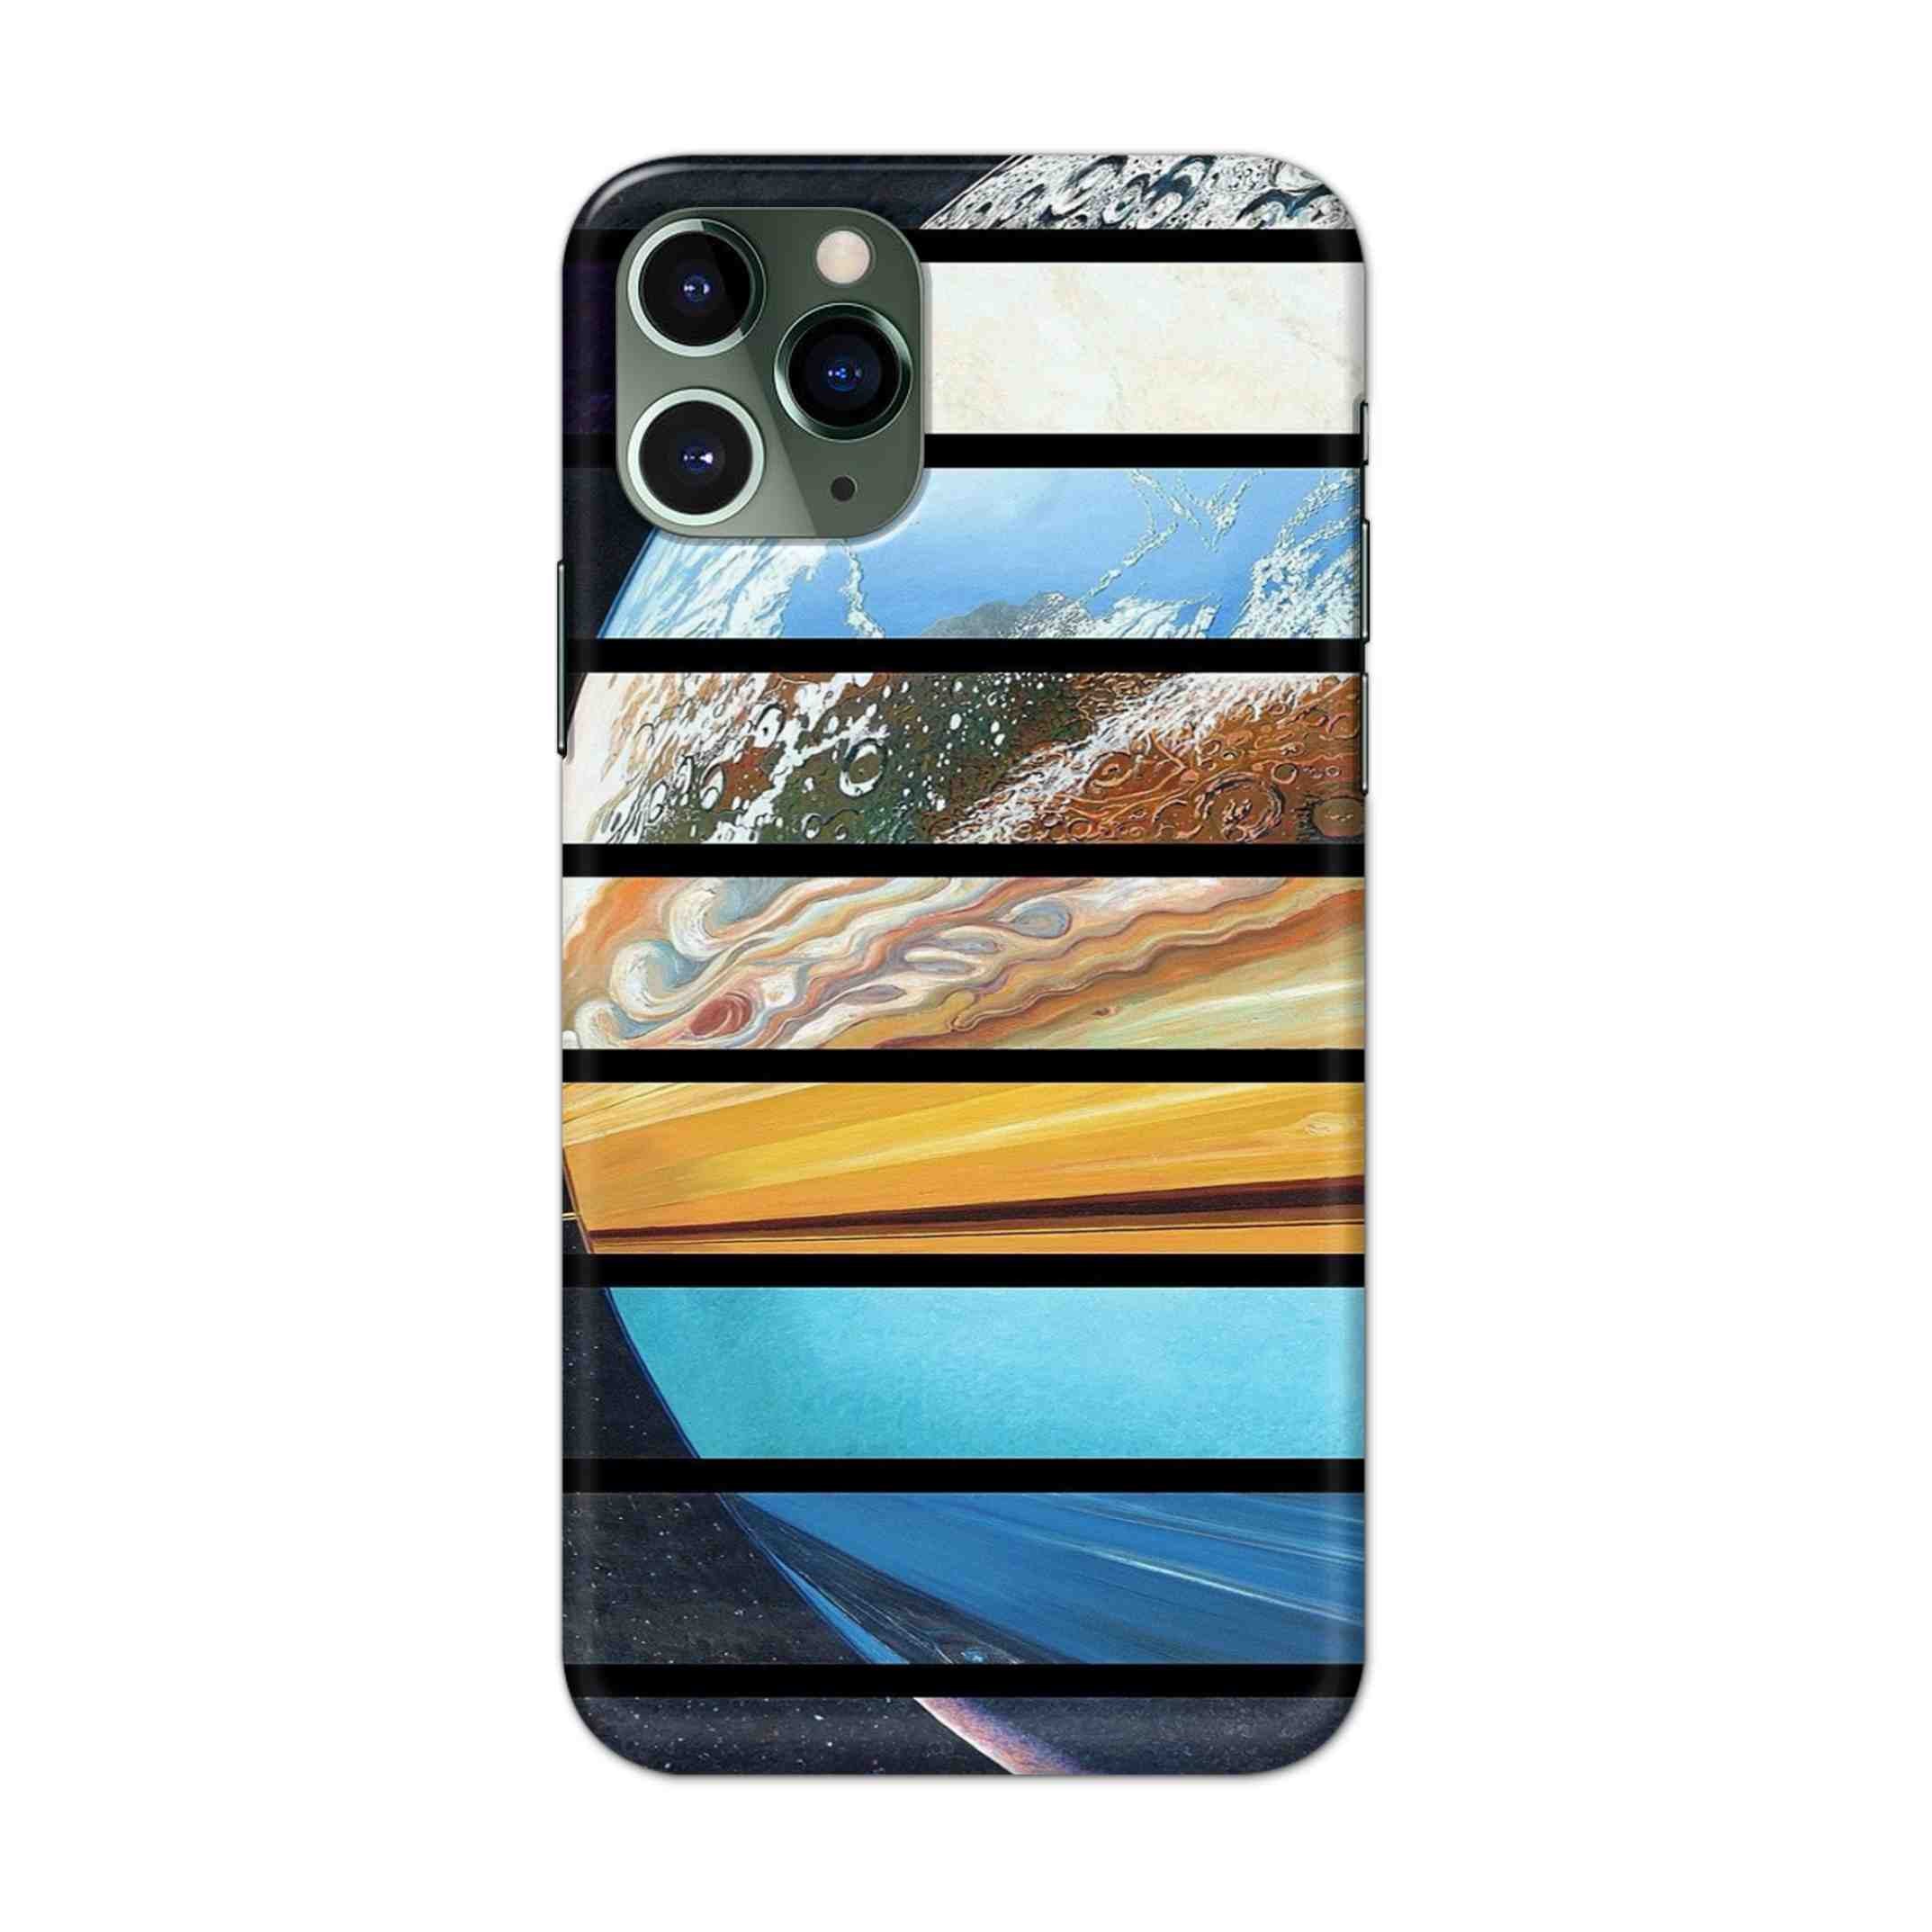 Buy Colourful Earth Hard Back Mobile Phone Case/Cover For iPhone 11 Pro Max Online